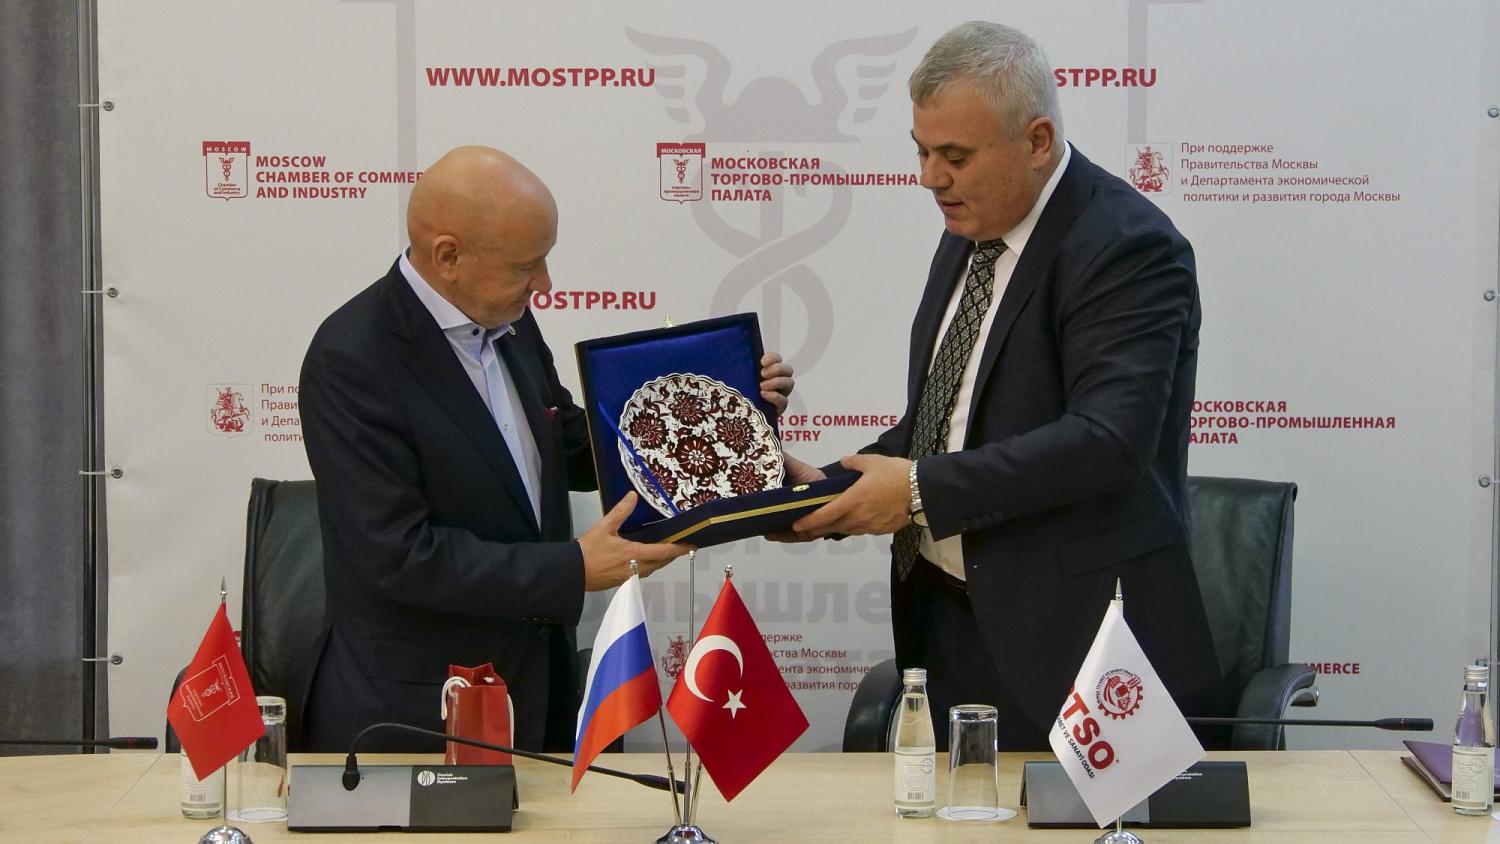 At the site of the MCCI, a Memorandum of Cooperation with the Bursa Chamber of Commerce and Industry was signed.